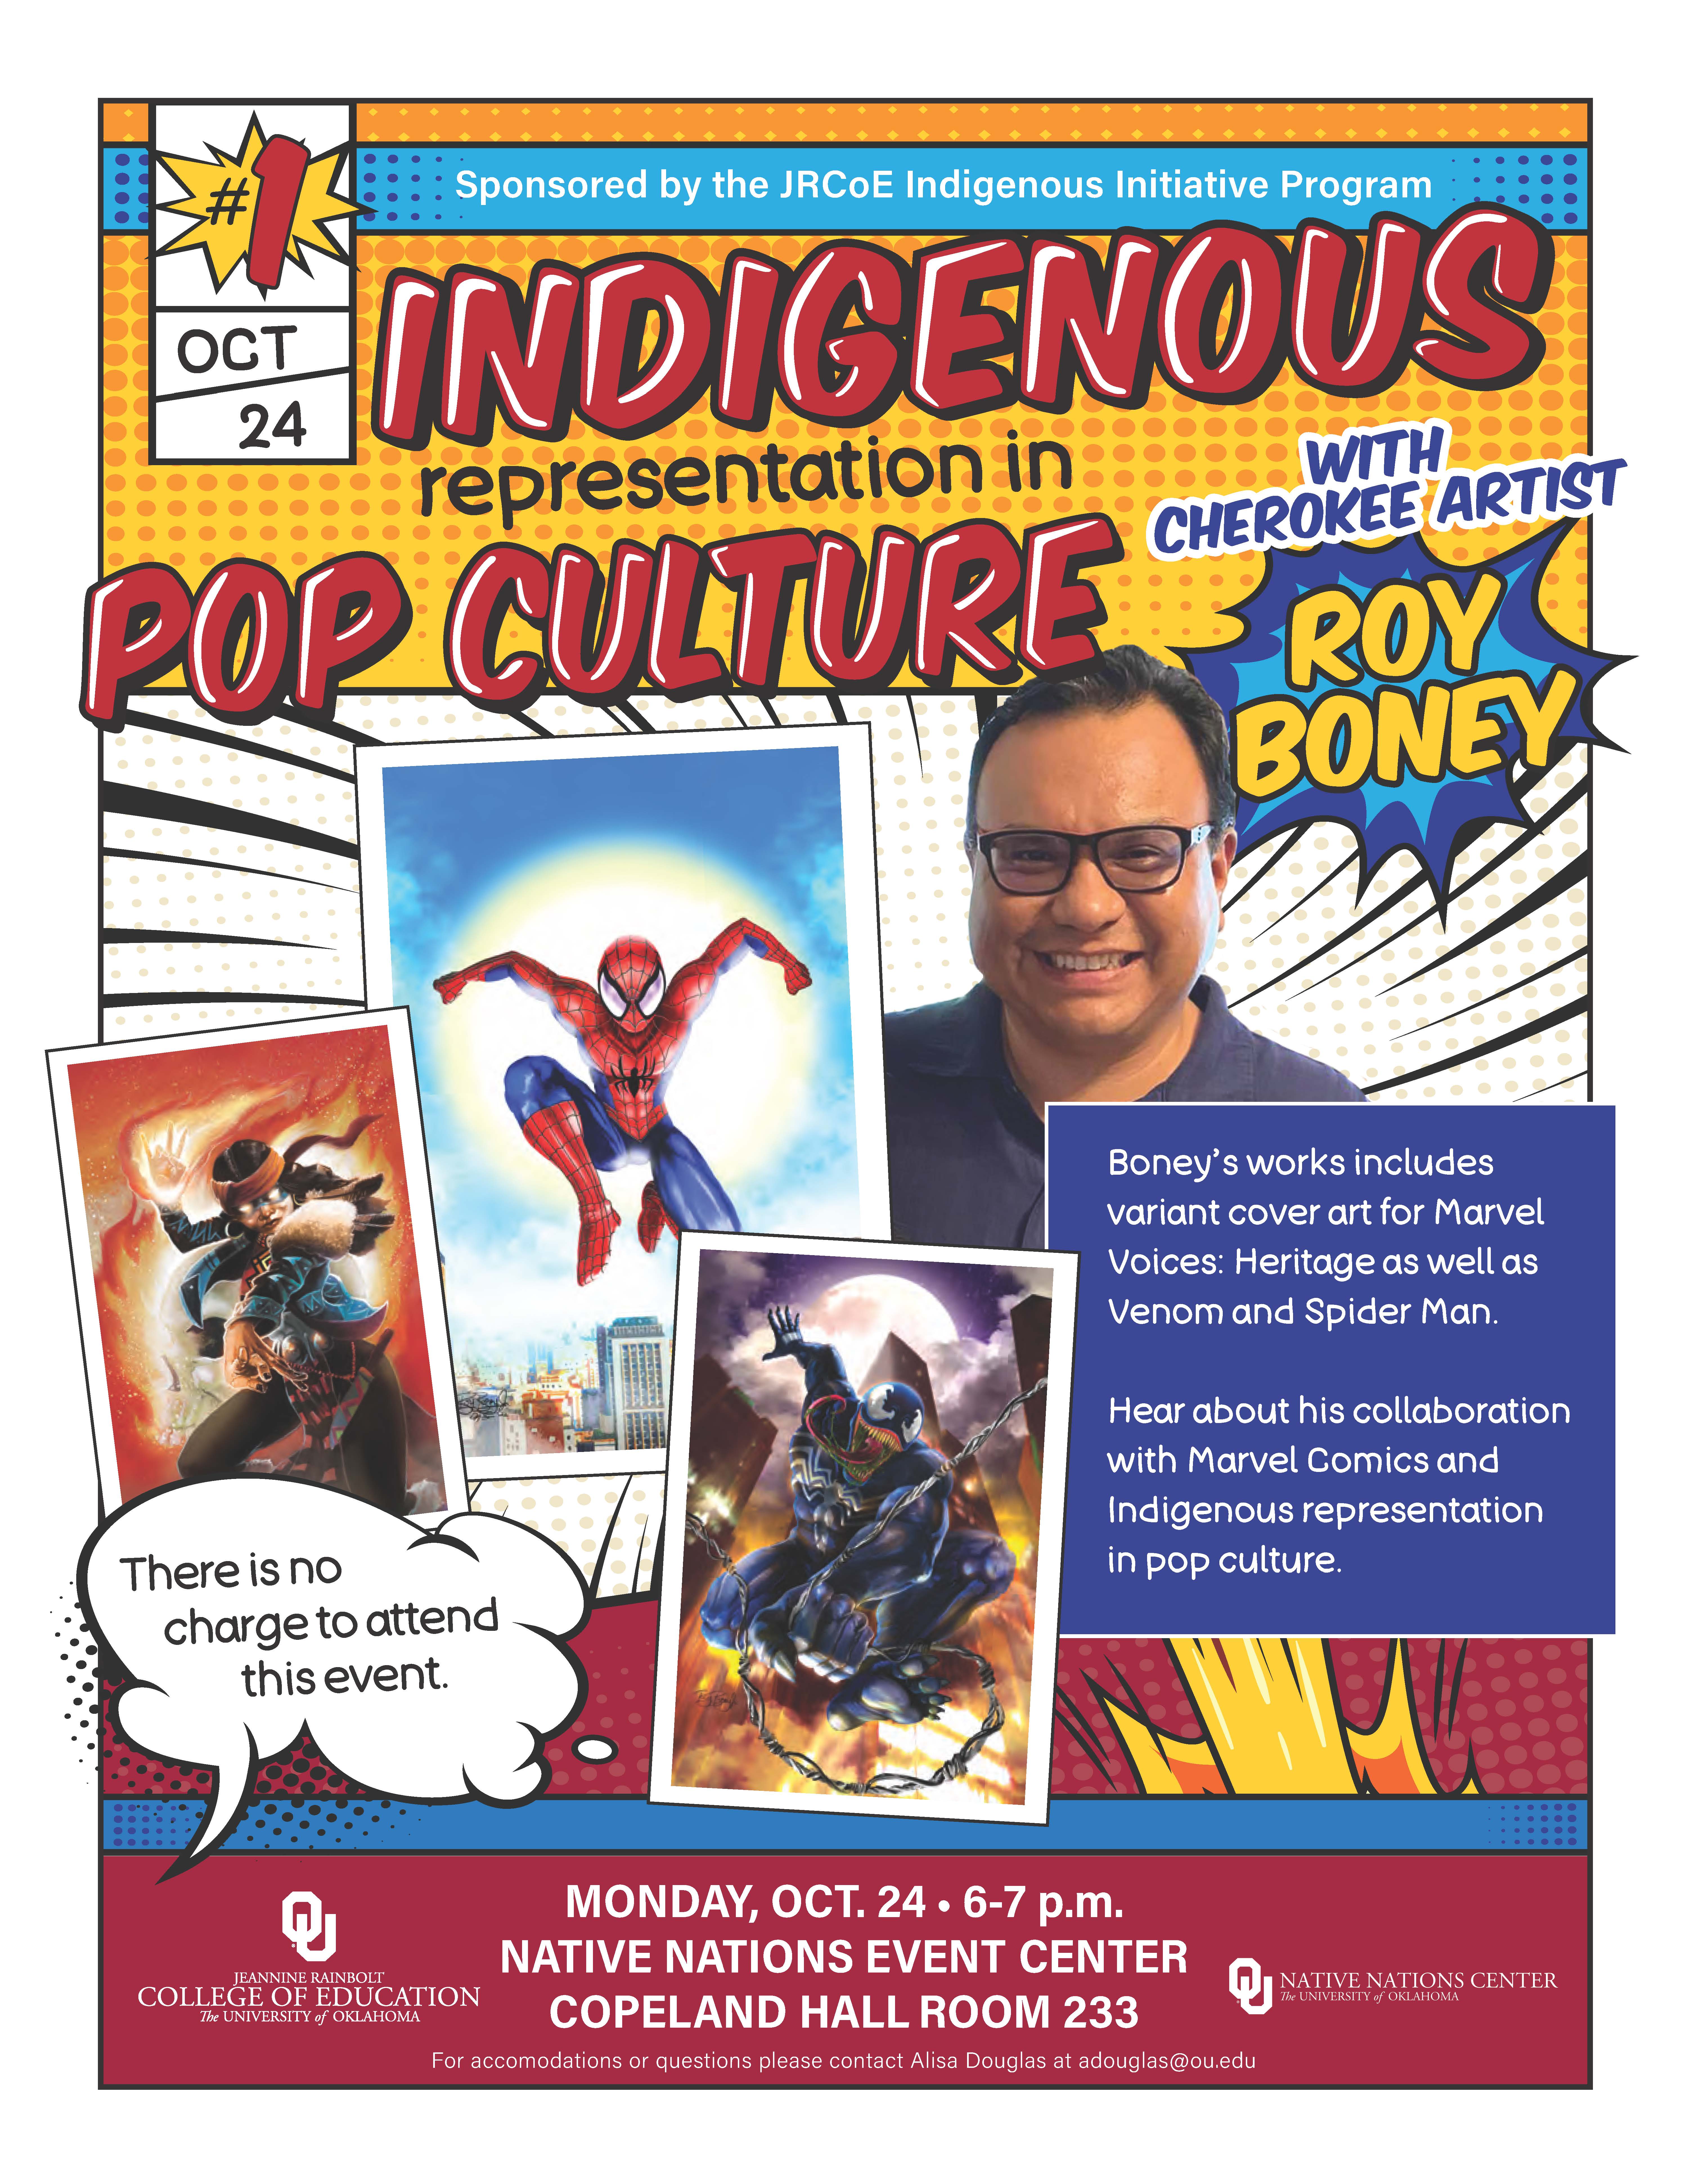 Indigenous Initiative Program: Indigenous Representation in Pop Culture with Cherokee Artist Roy Boney on Monday, Oct. 24th from 6-7 P.M. in the Native Nations Event Center, Room 233 of Copeland Hall on the Norman OU Campus. Boney's works includes variant cover art for Marvel Voices: Heritage as well as Venom and Spider Man. Hear about his collaboration with Marvel Comics and Indigenous representation in pop culture. 